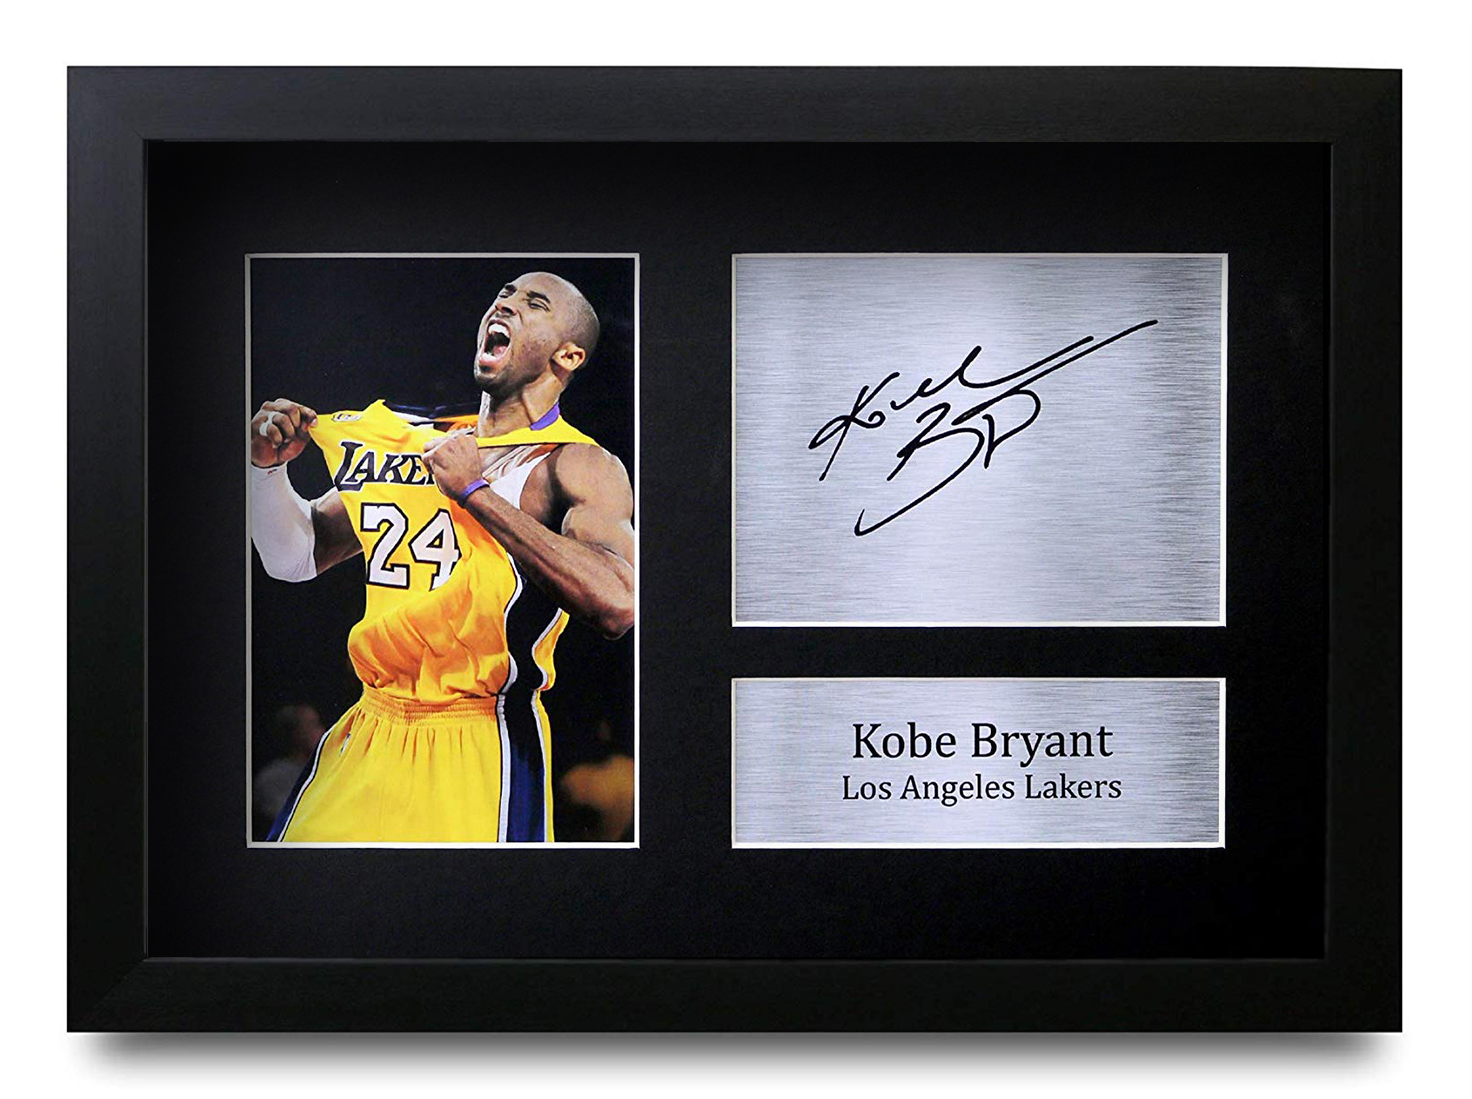 Back View Framed Kobe Bryant Autograph Replica Print Los Angeles Lakers